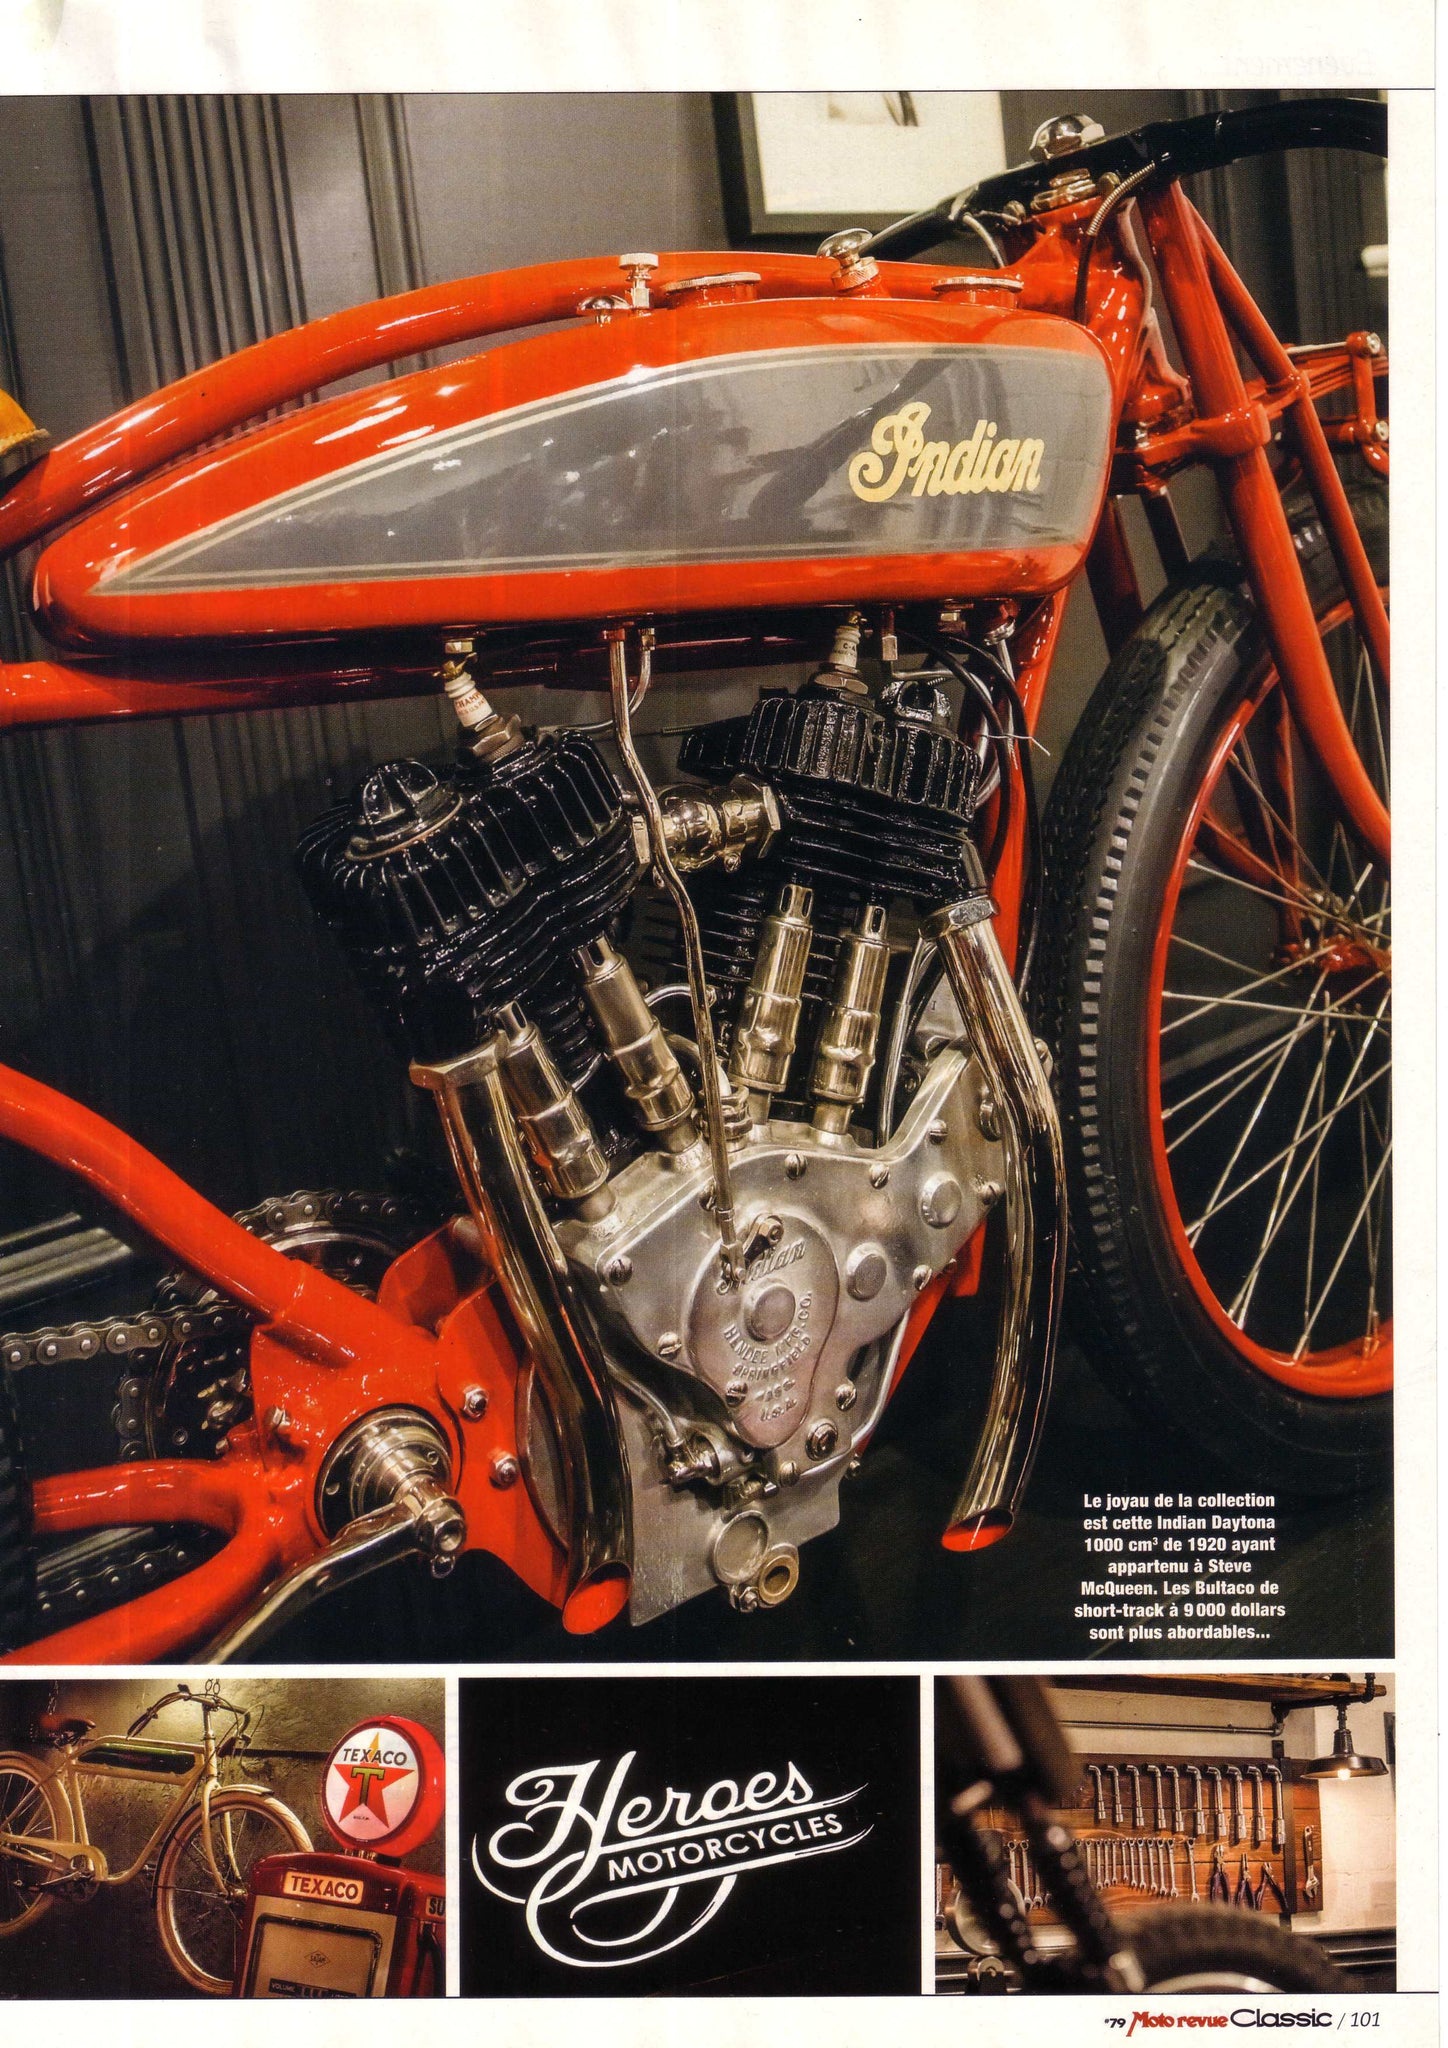 Los Angeles based motorcycle store specializing in restoring and selling vintage motorbikes.